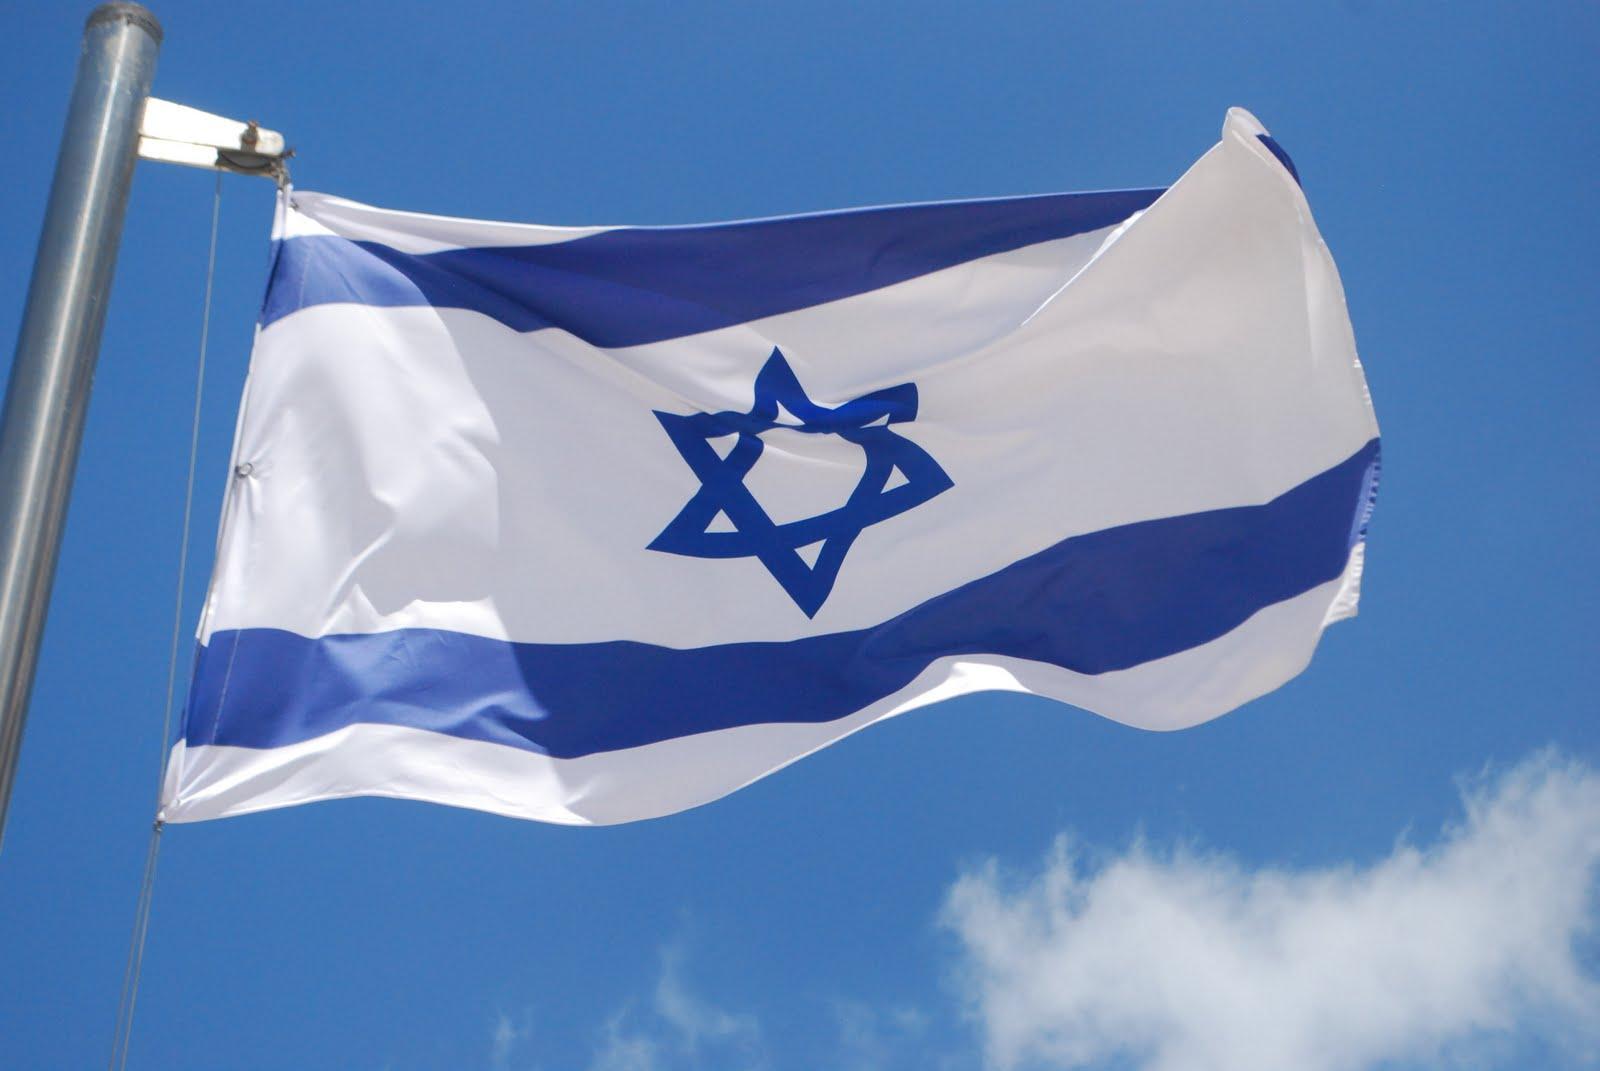 Israel's Q3 growth surprisingly high